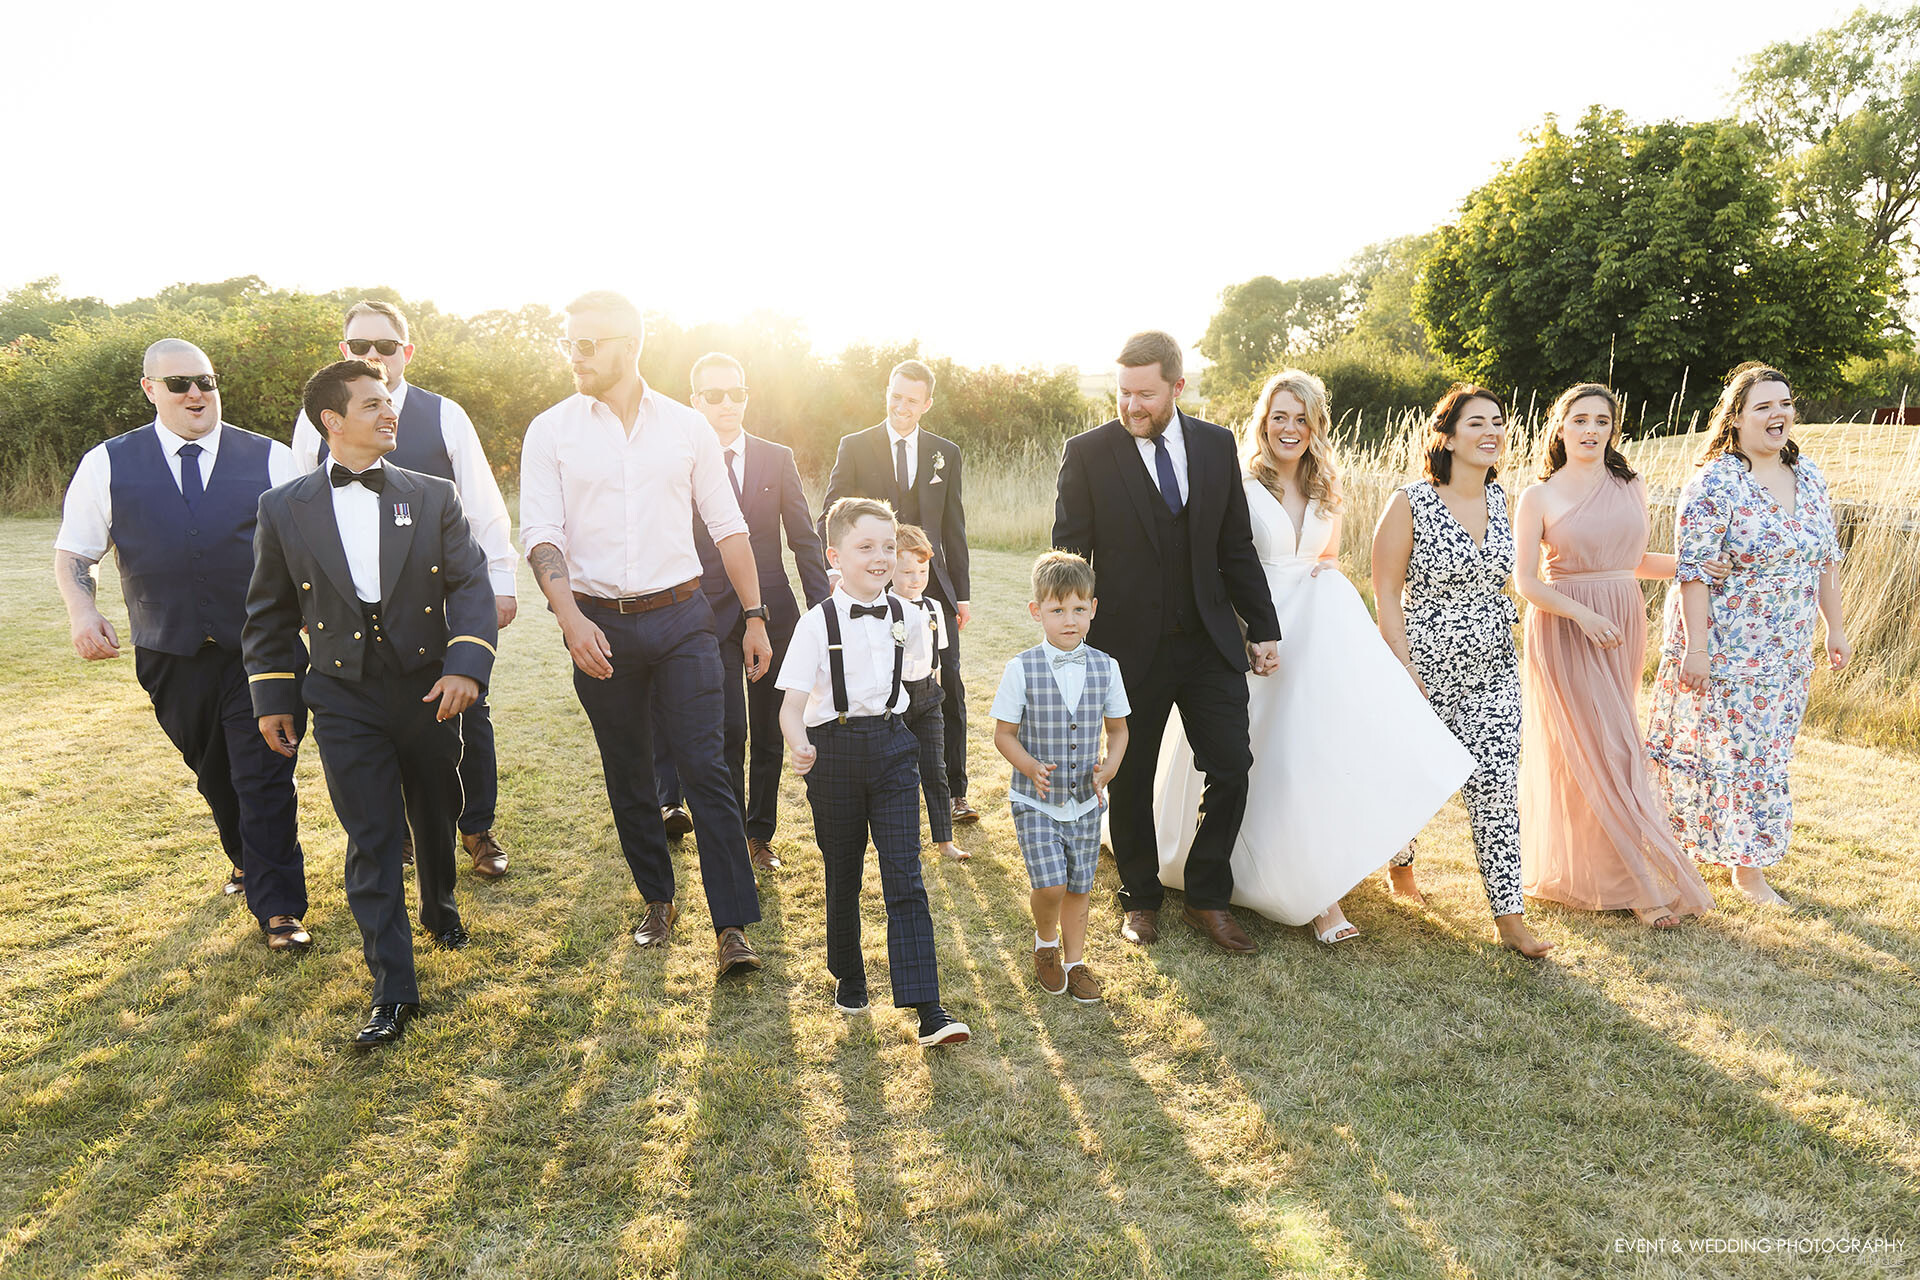 Golden hour bridal party and groomsmen